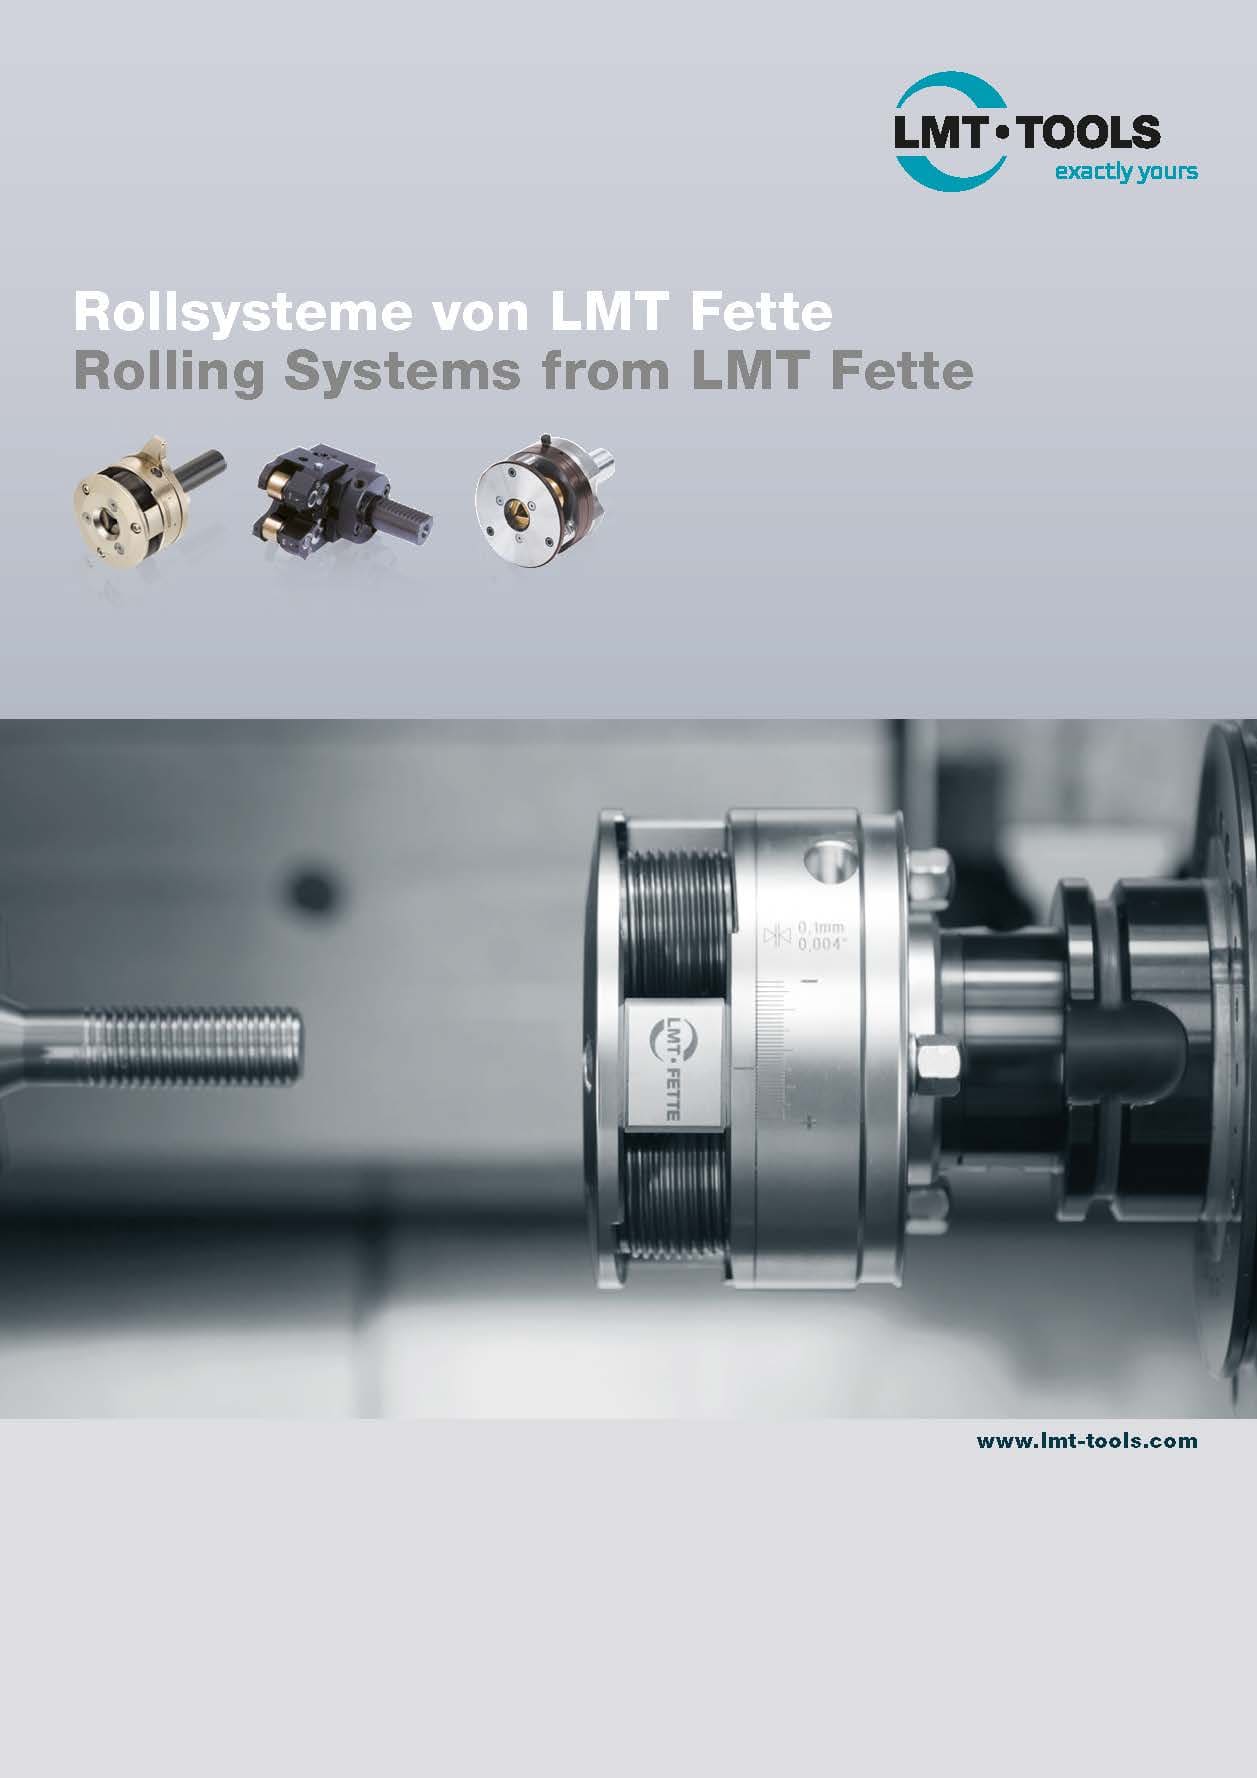 Rolling Systems from LMT Fette